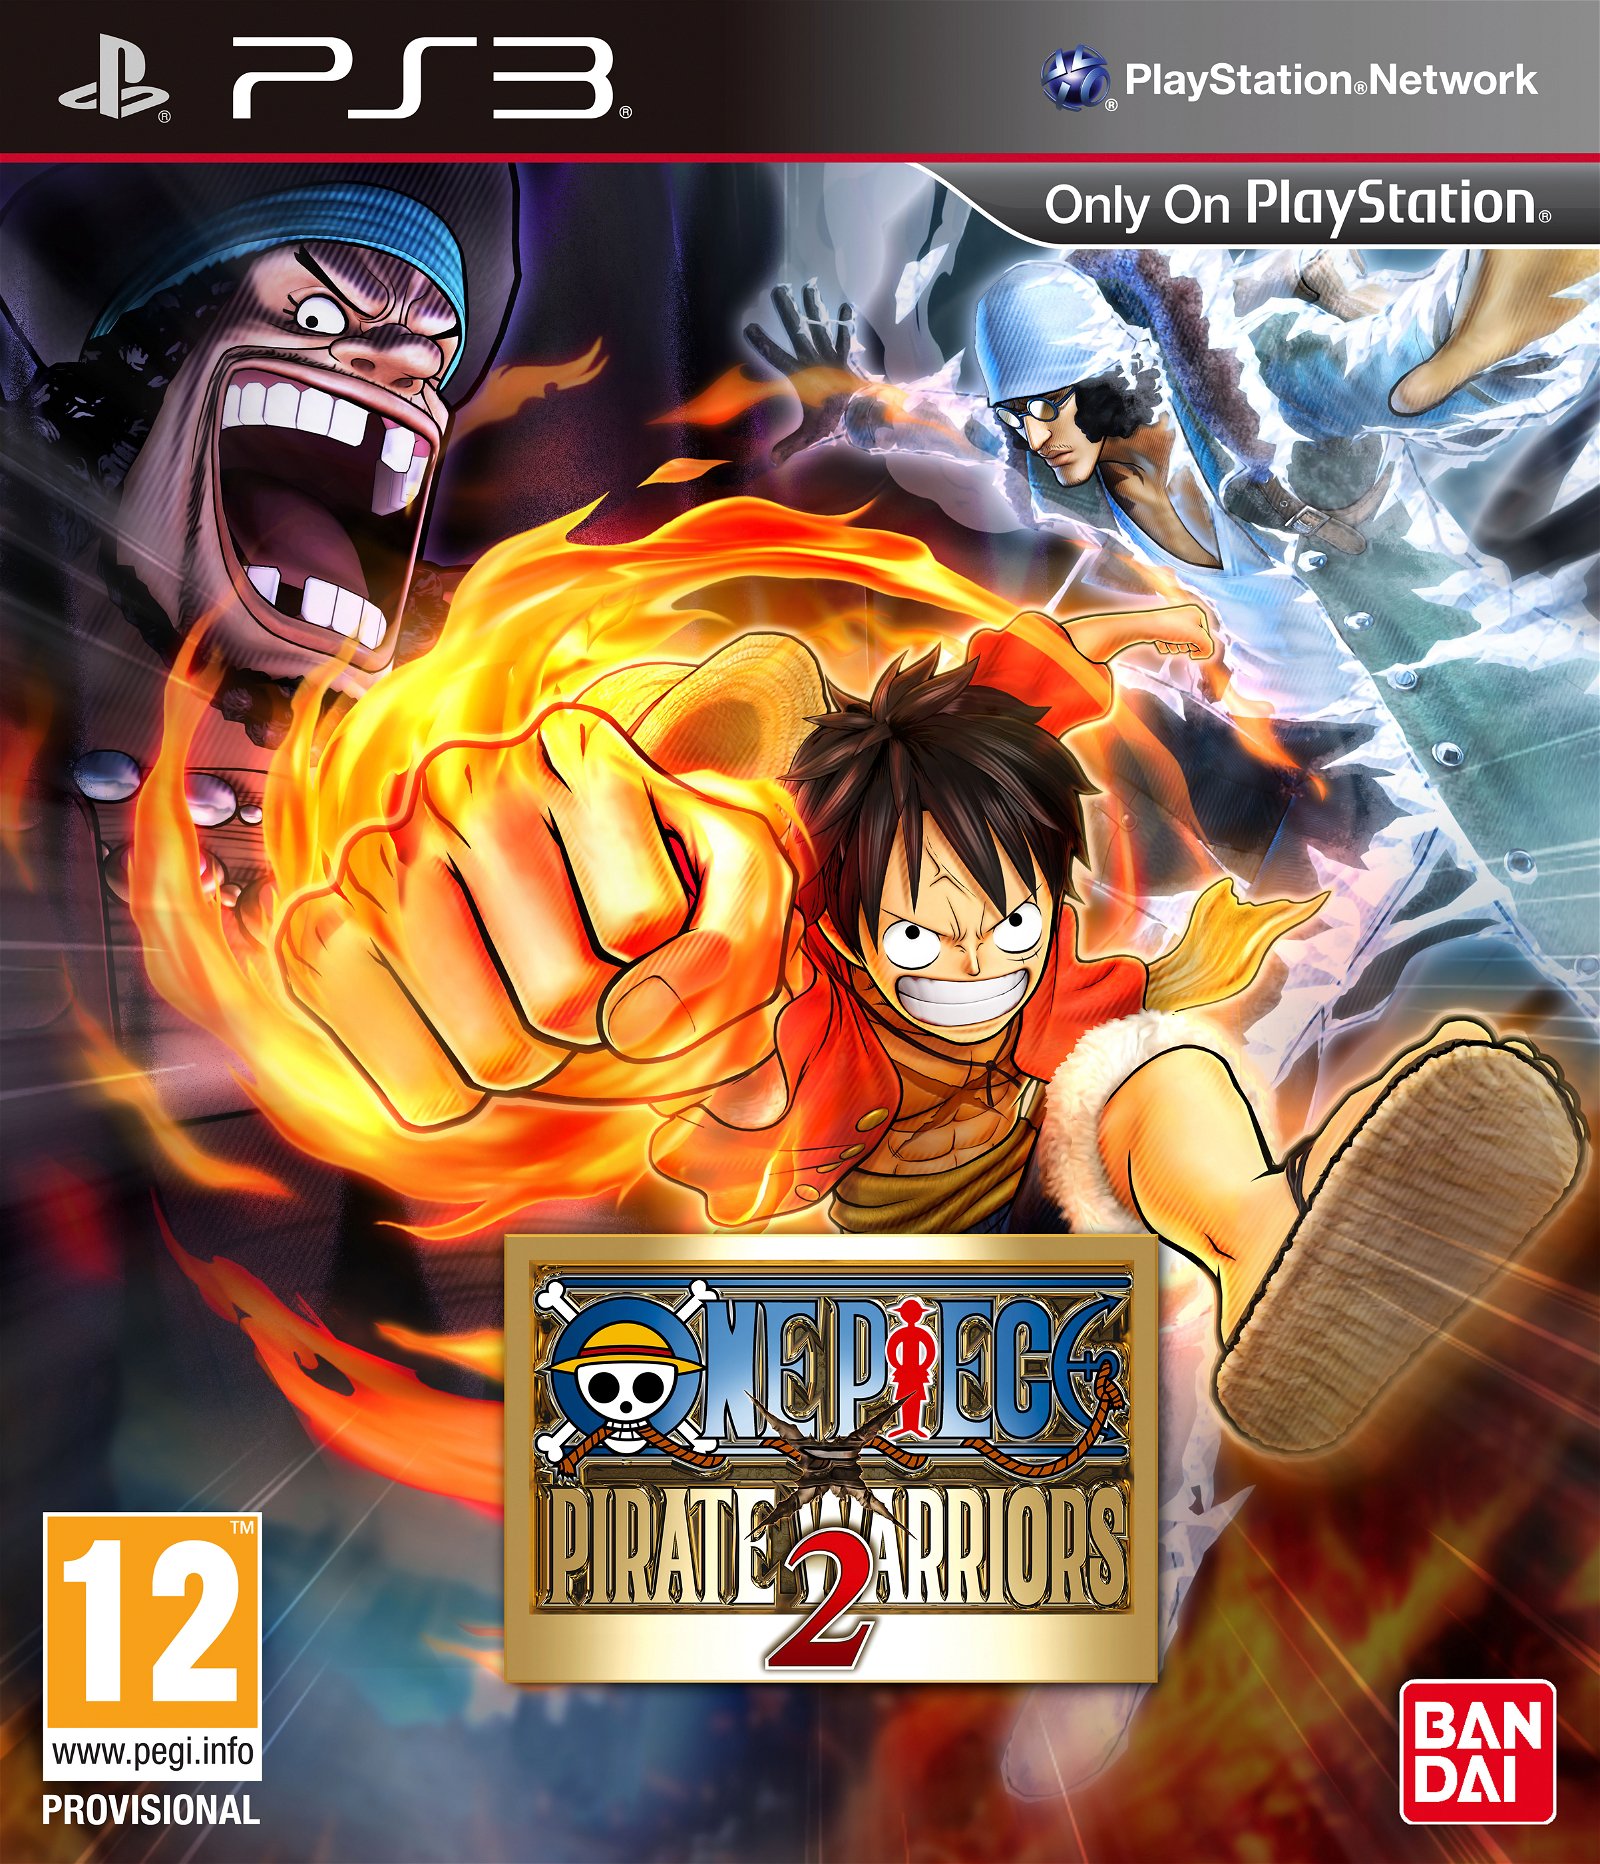 Image of One Piece: Pirate Warriors 2